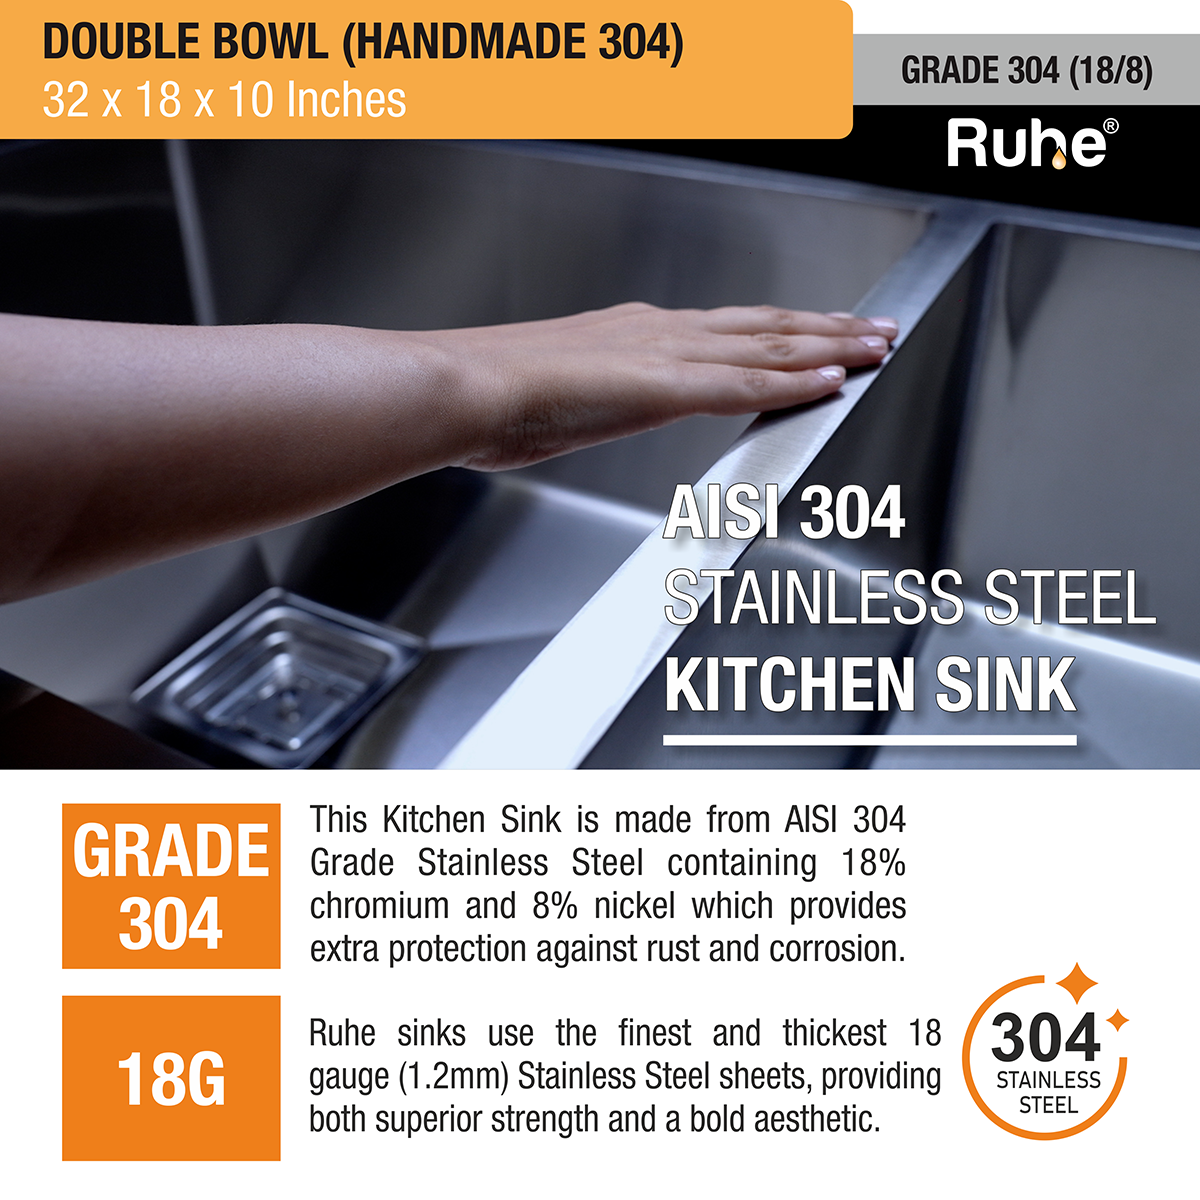 Handmade Double Bowl 304-Grade Kitchen Sink (32 x 18 x 10 Inches) stainless steel